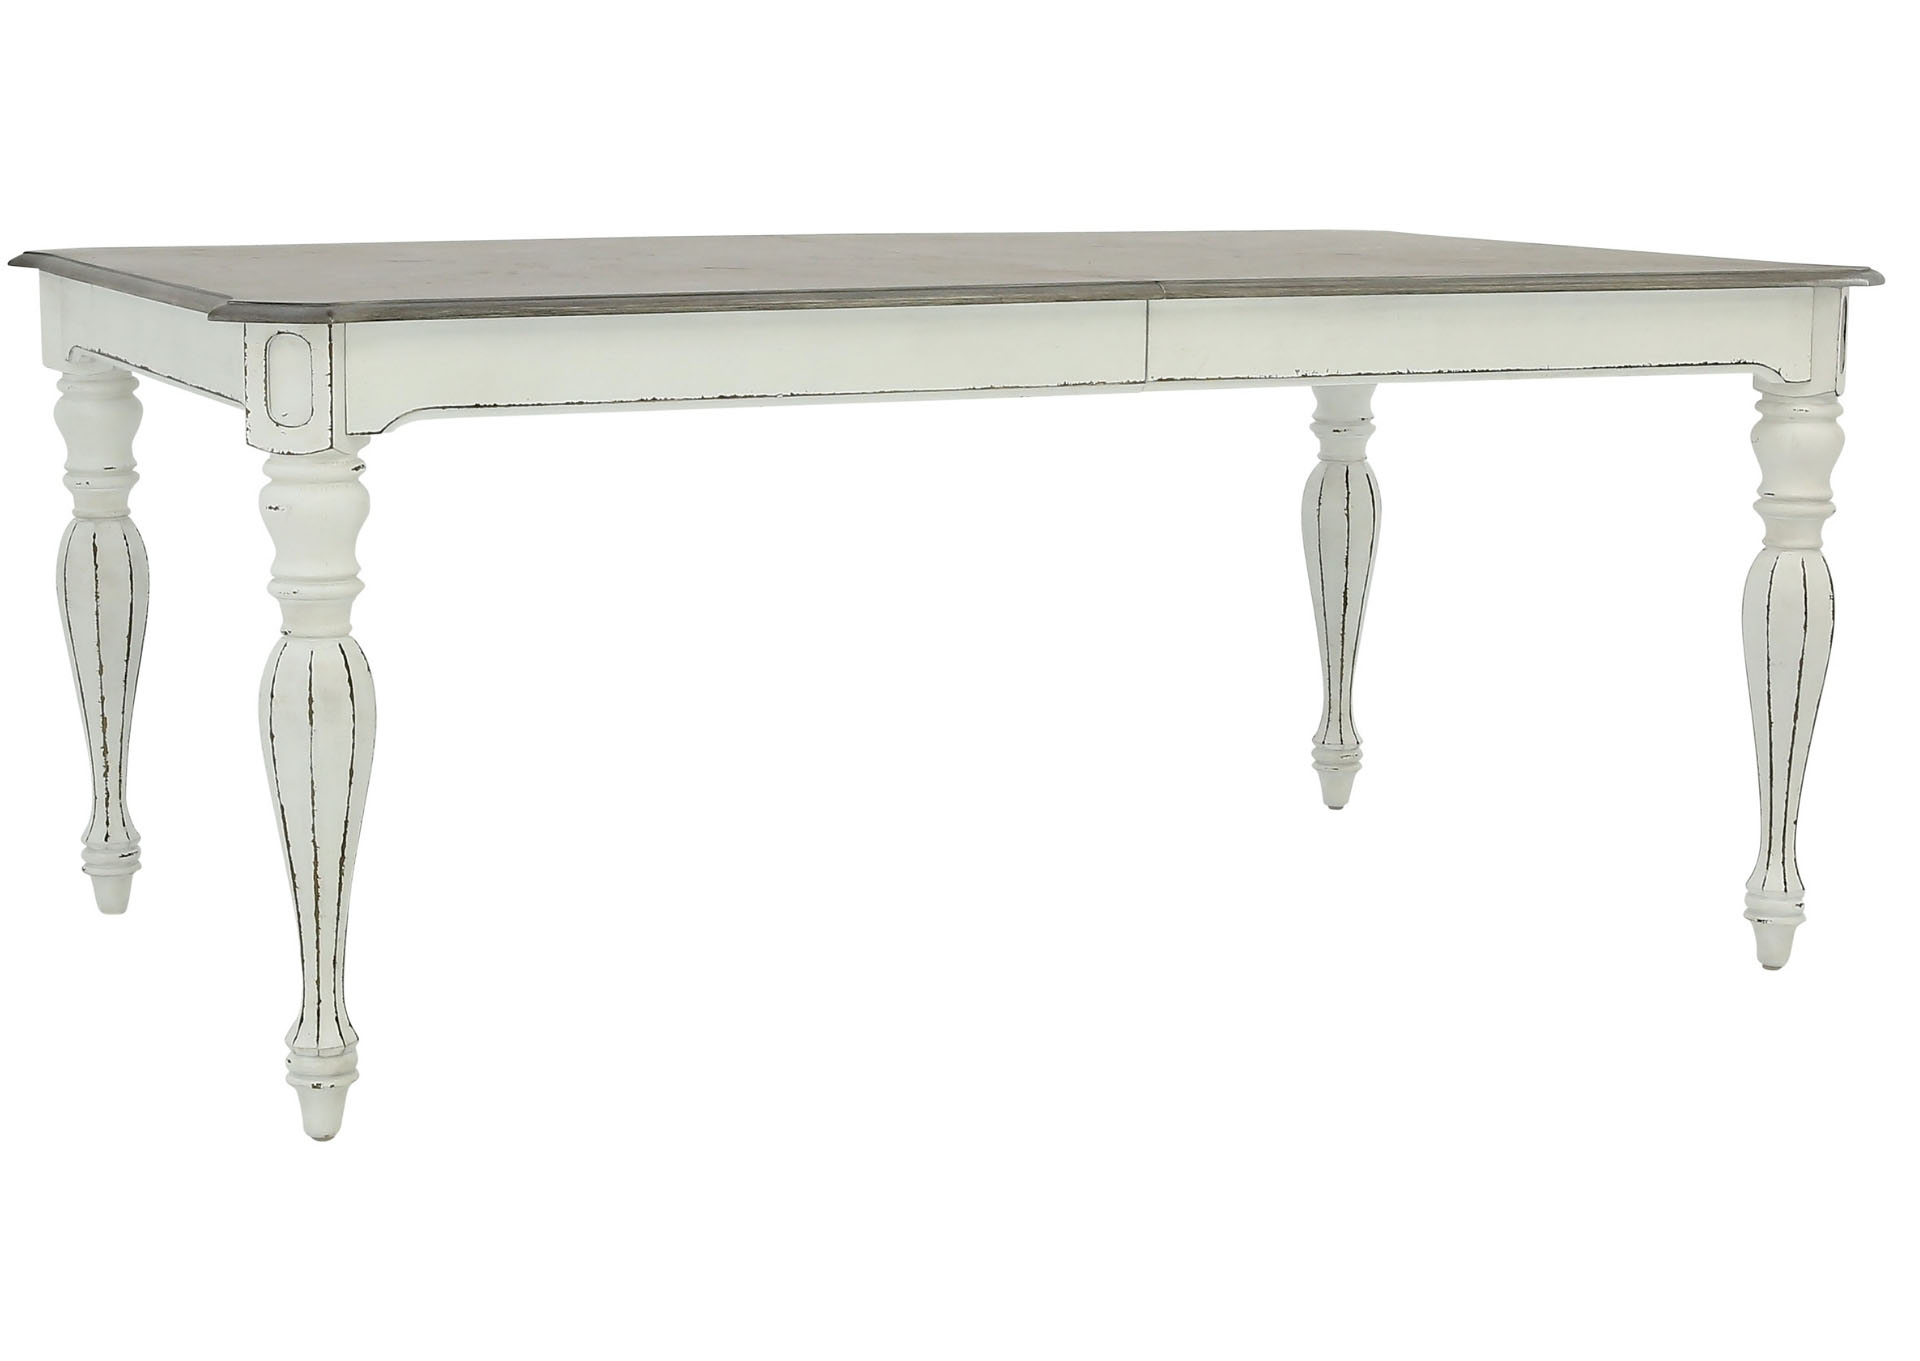 MAGNOLIA MANOR DINING TABLE WITH LEAF